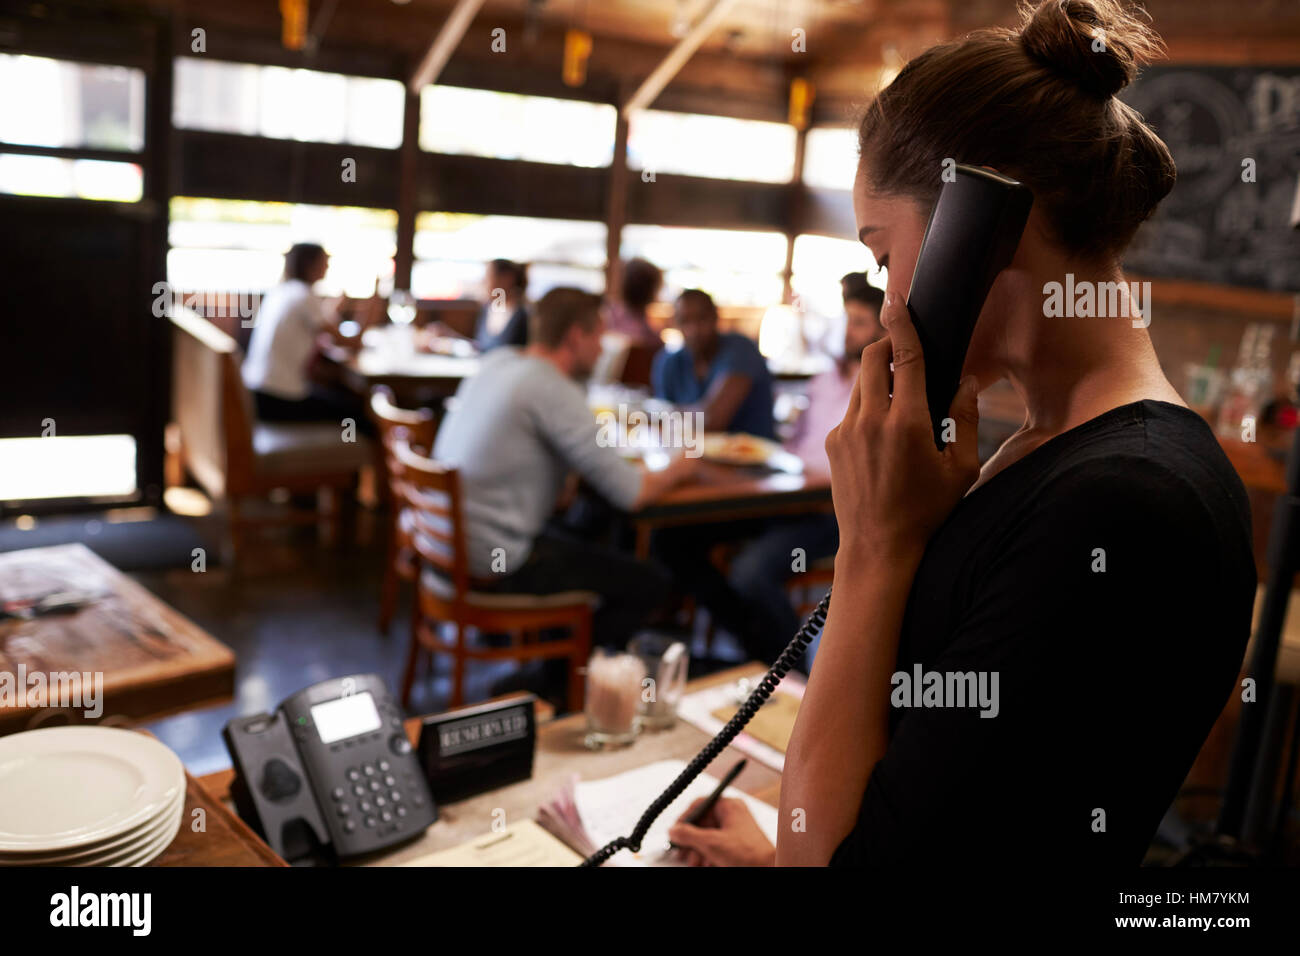 Young woman taking a reservation by phone at a restaurant Stock Photo